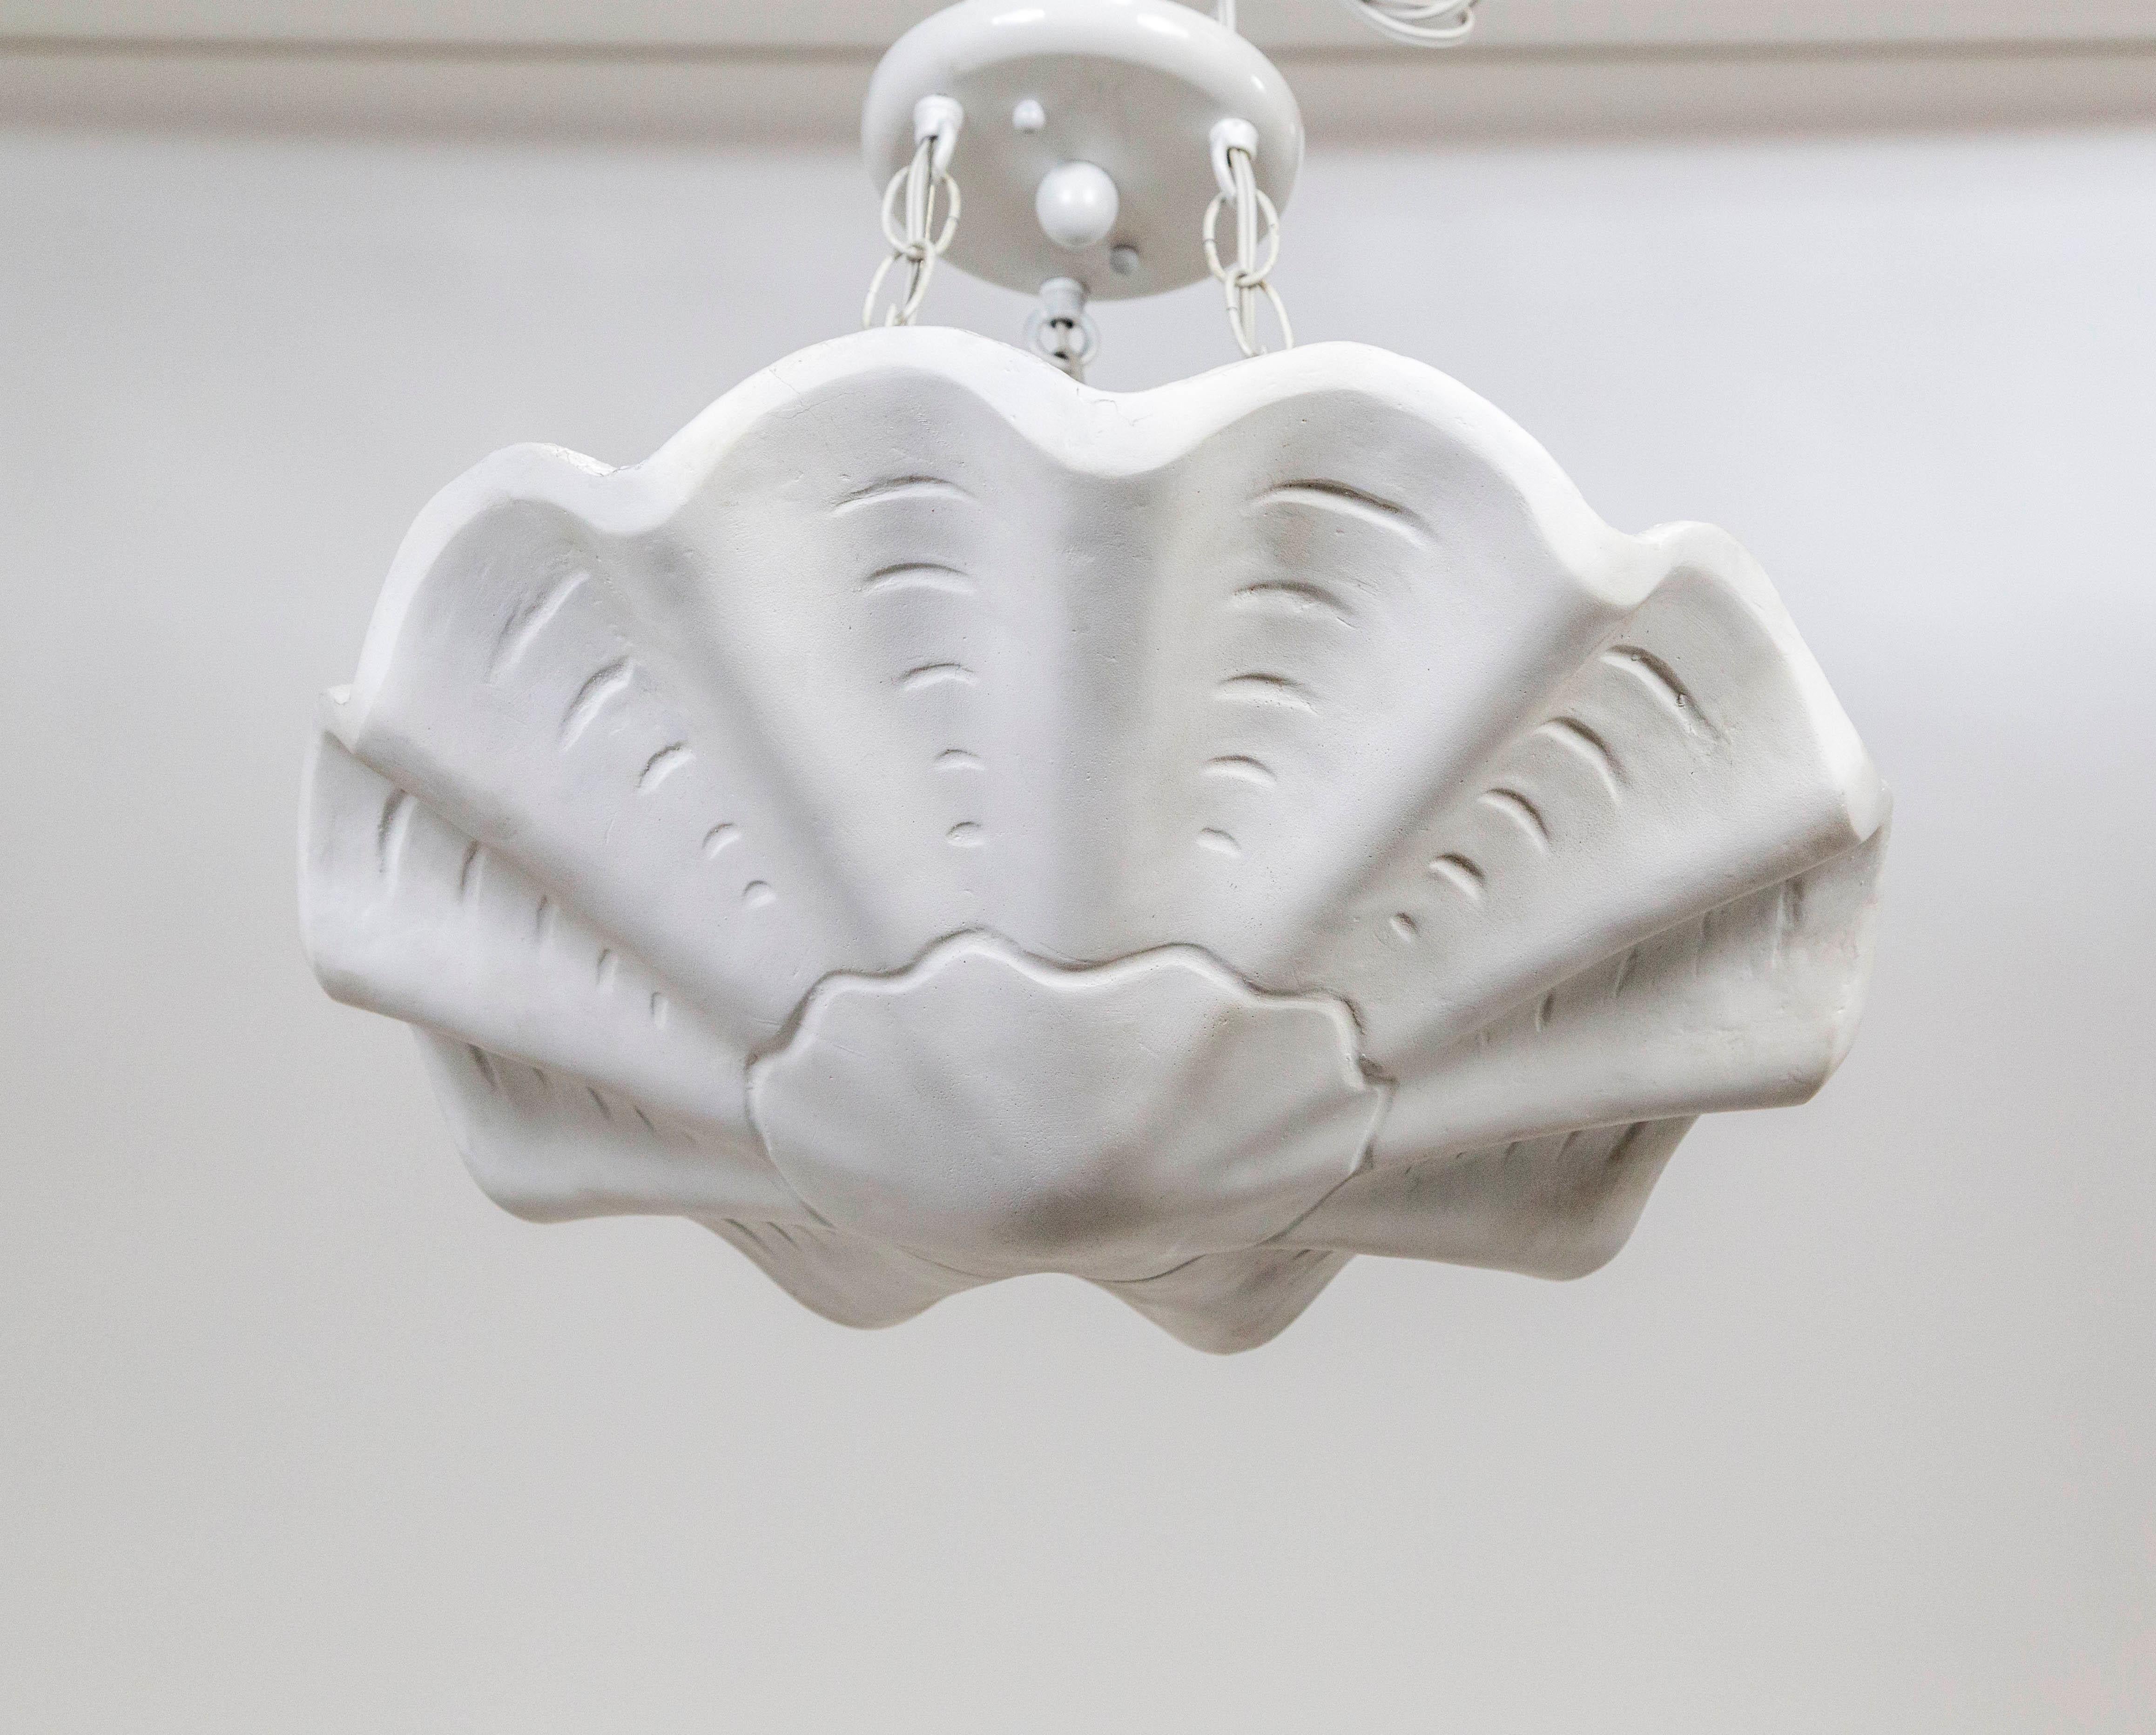 A plaster pendant in an undulating shell shape, with scalloped edges and imprinted lines accentuating the form.  A newer take on Francis Elkins's 1940's plaster plafonnier.  Hanging by three white chains; with 3 medium base ceramic sockets.